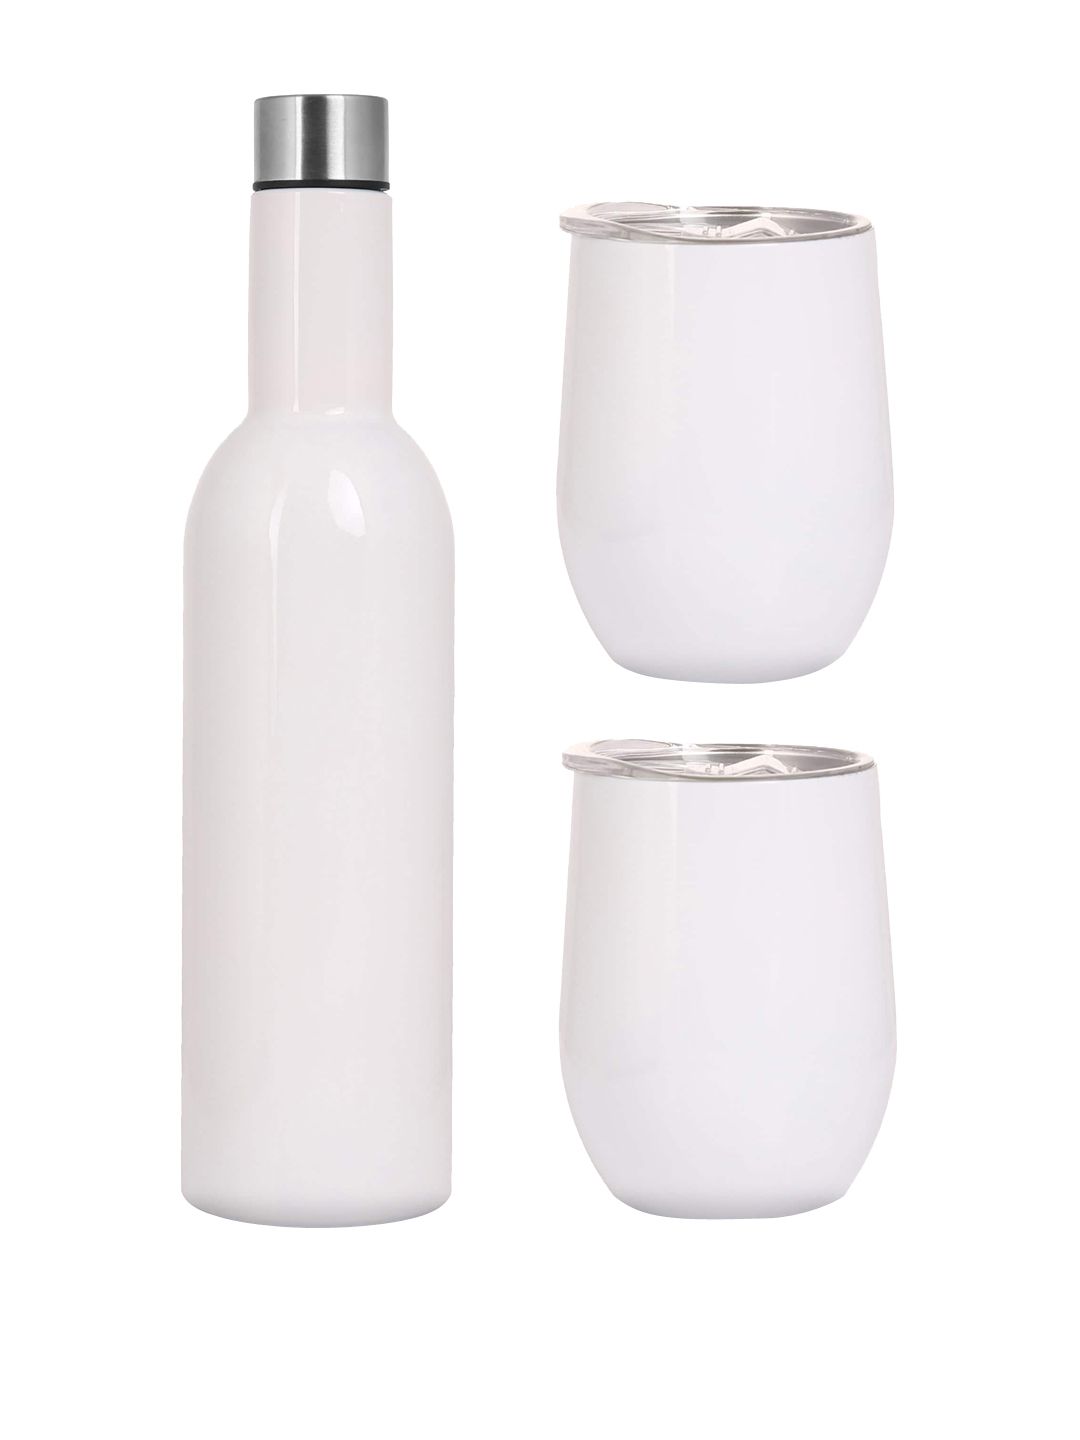 earthism Unisex White Double Wall Insulated Stainless Steel Bottle Flask & Tumbler Price in India